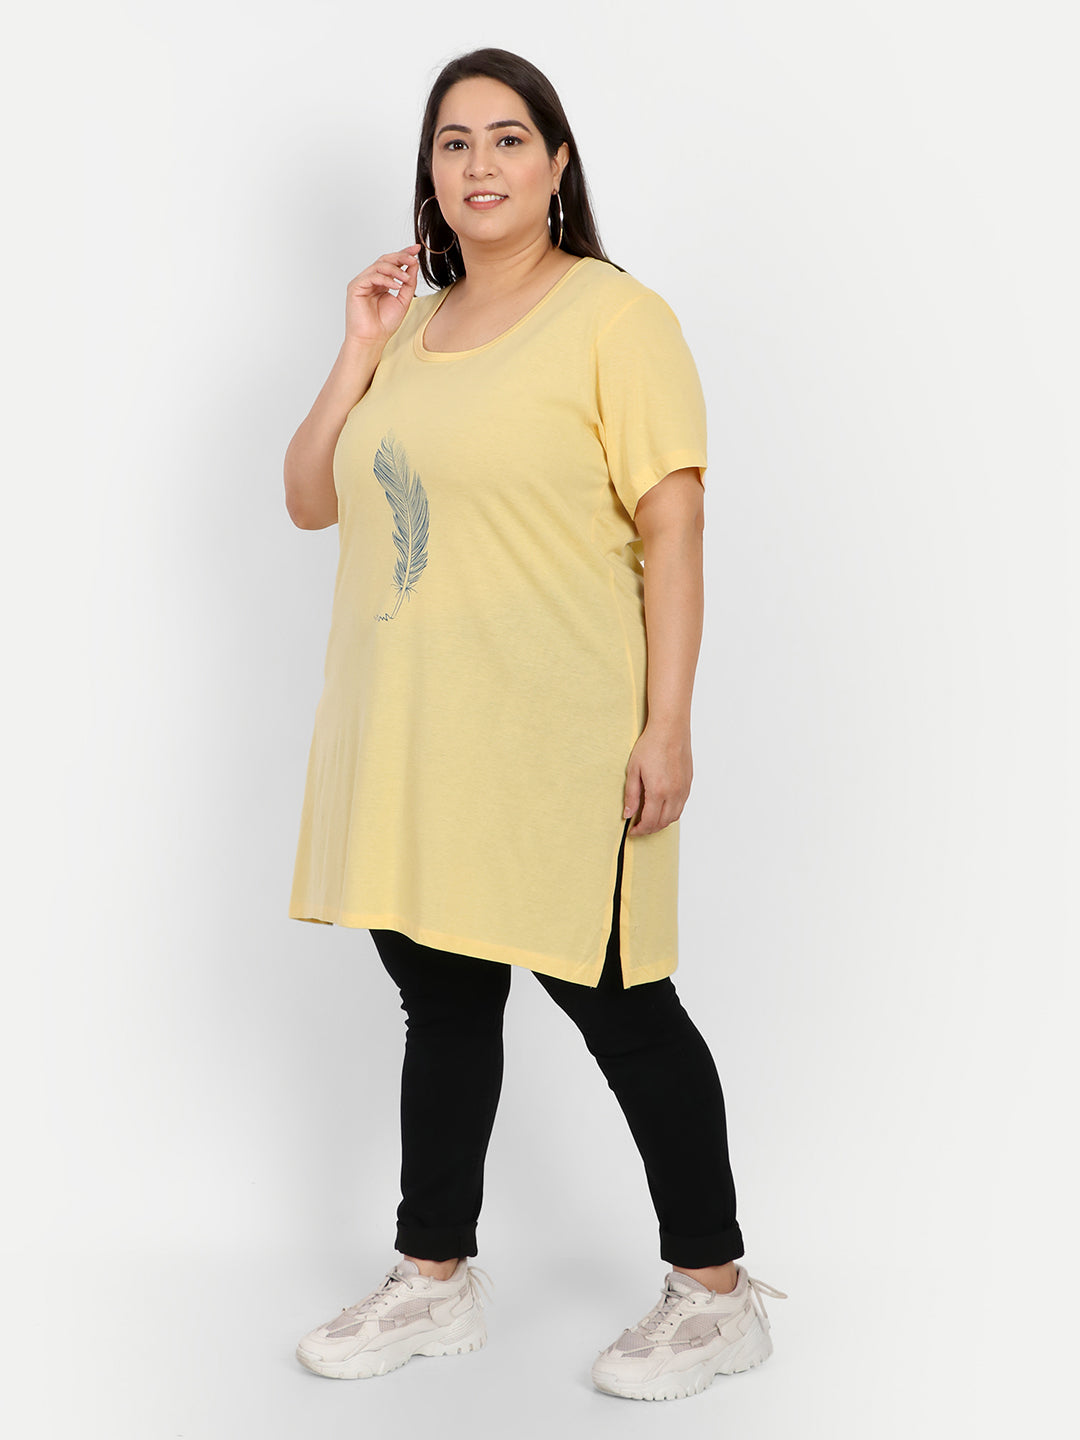 Comfy Lemon Yellow Printed Cotton Long T-shirt For Women (Half Sleeves) Online In India